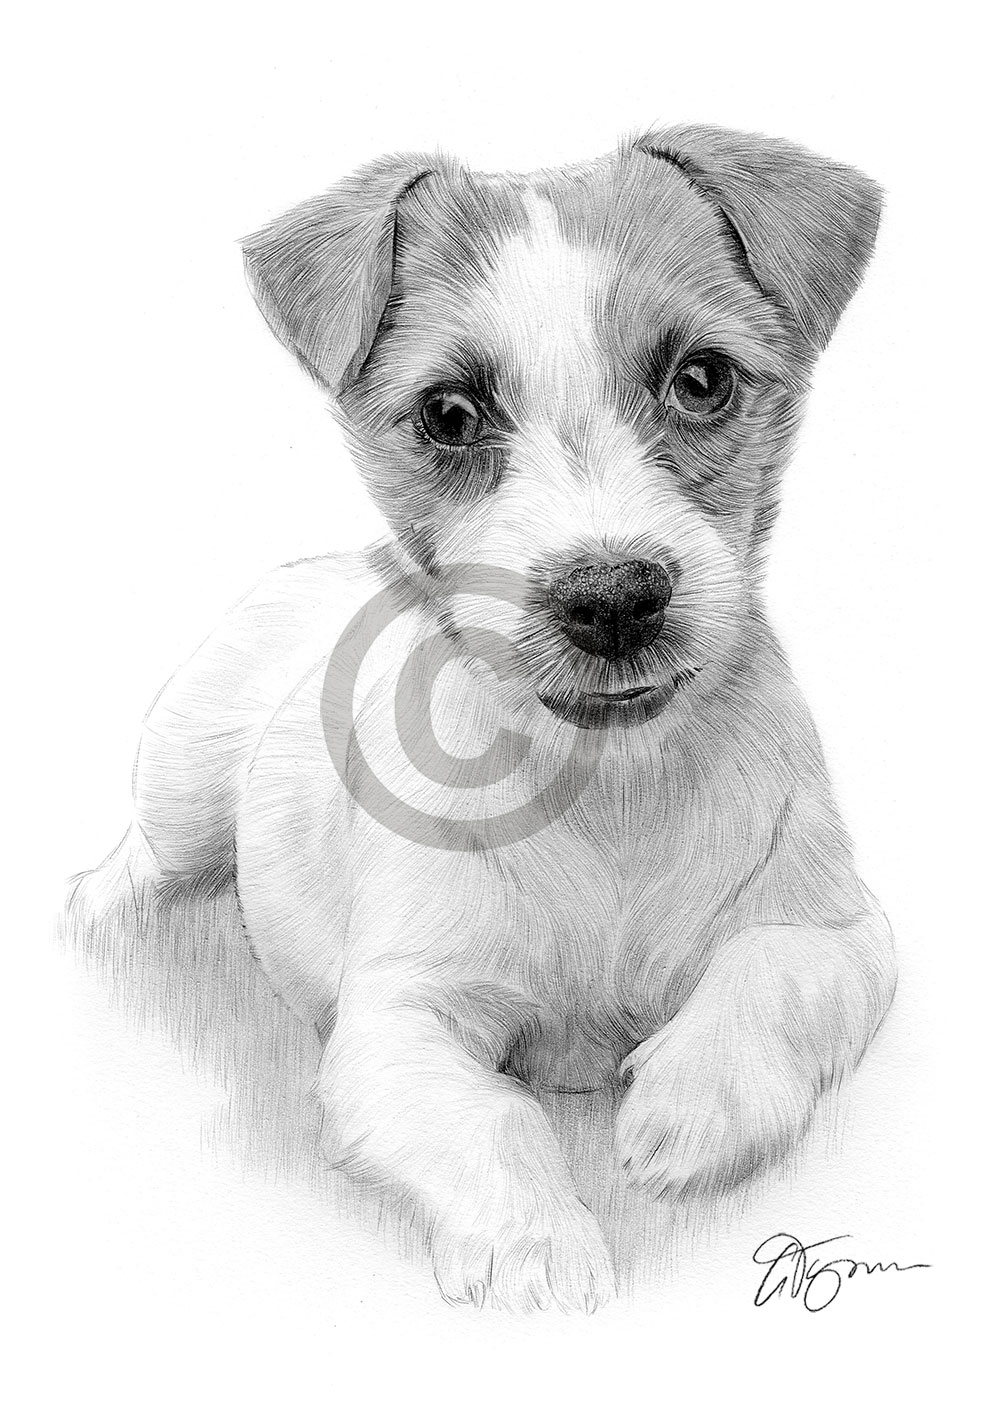 Pencil drawing of a young Jack Russell Terrier puppy by artist Gary Tymon